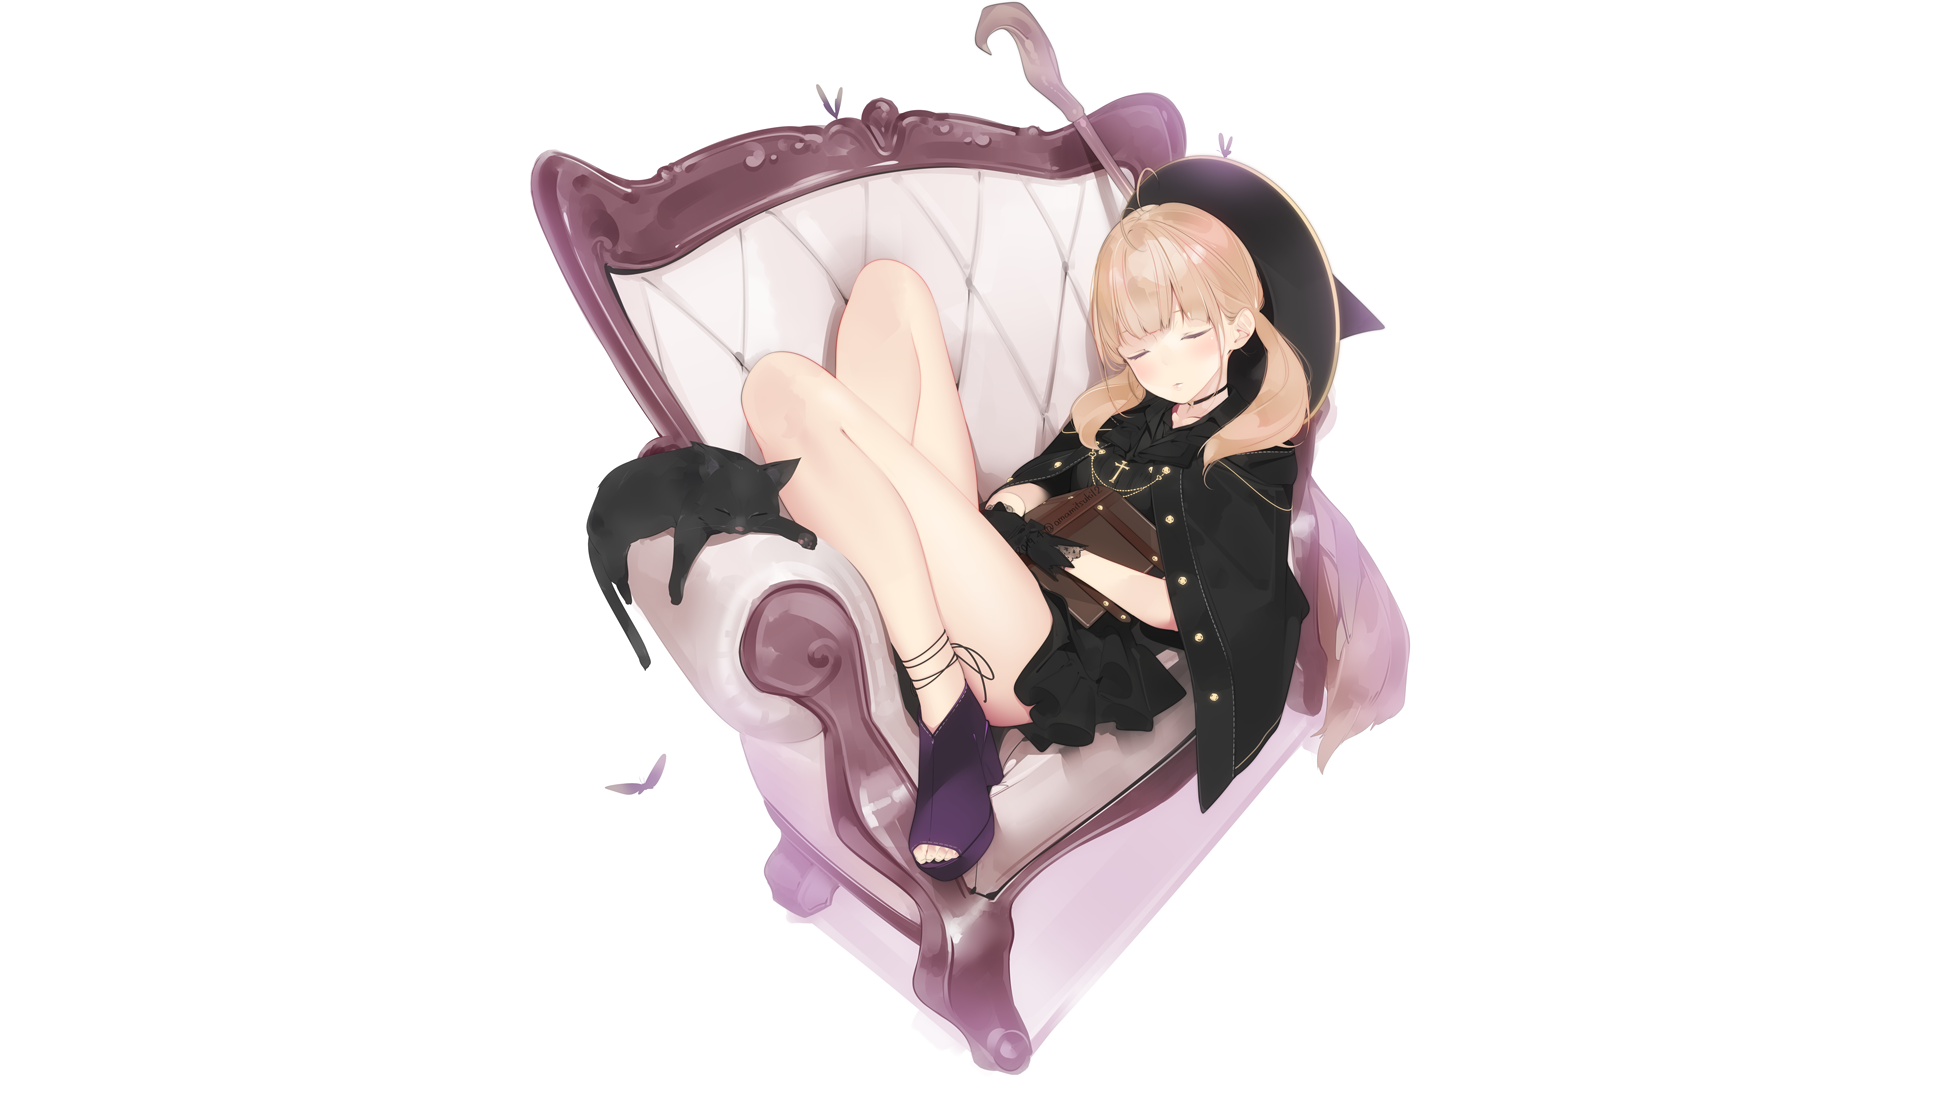 Anime 1956x1100 anime girls original characters women blonde twintails fantasy girl witch witch hat witch's broom dress lying on back cats black cats couch artwork drawing minimalism amamitsuki12 heels anime Pixiv animals sleeping white background mammals thighs books